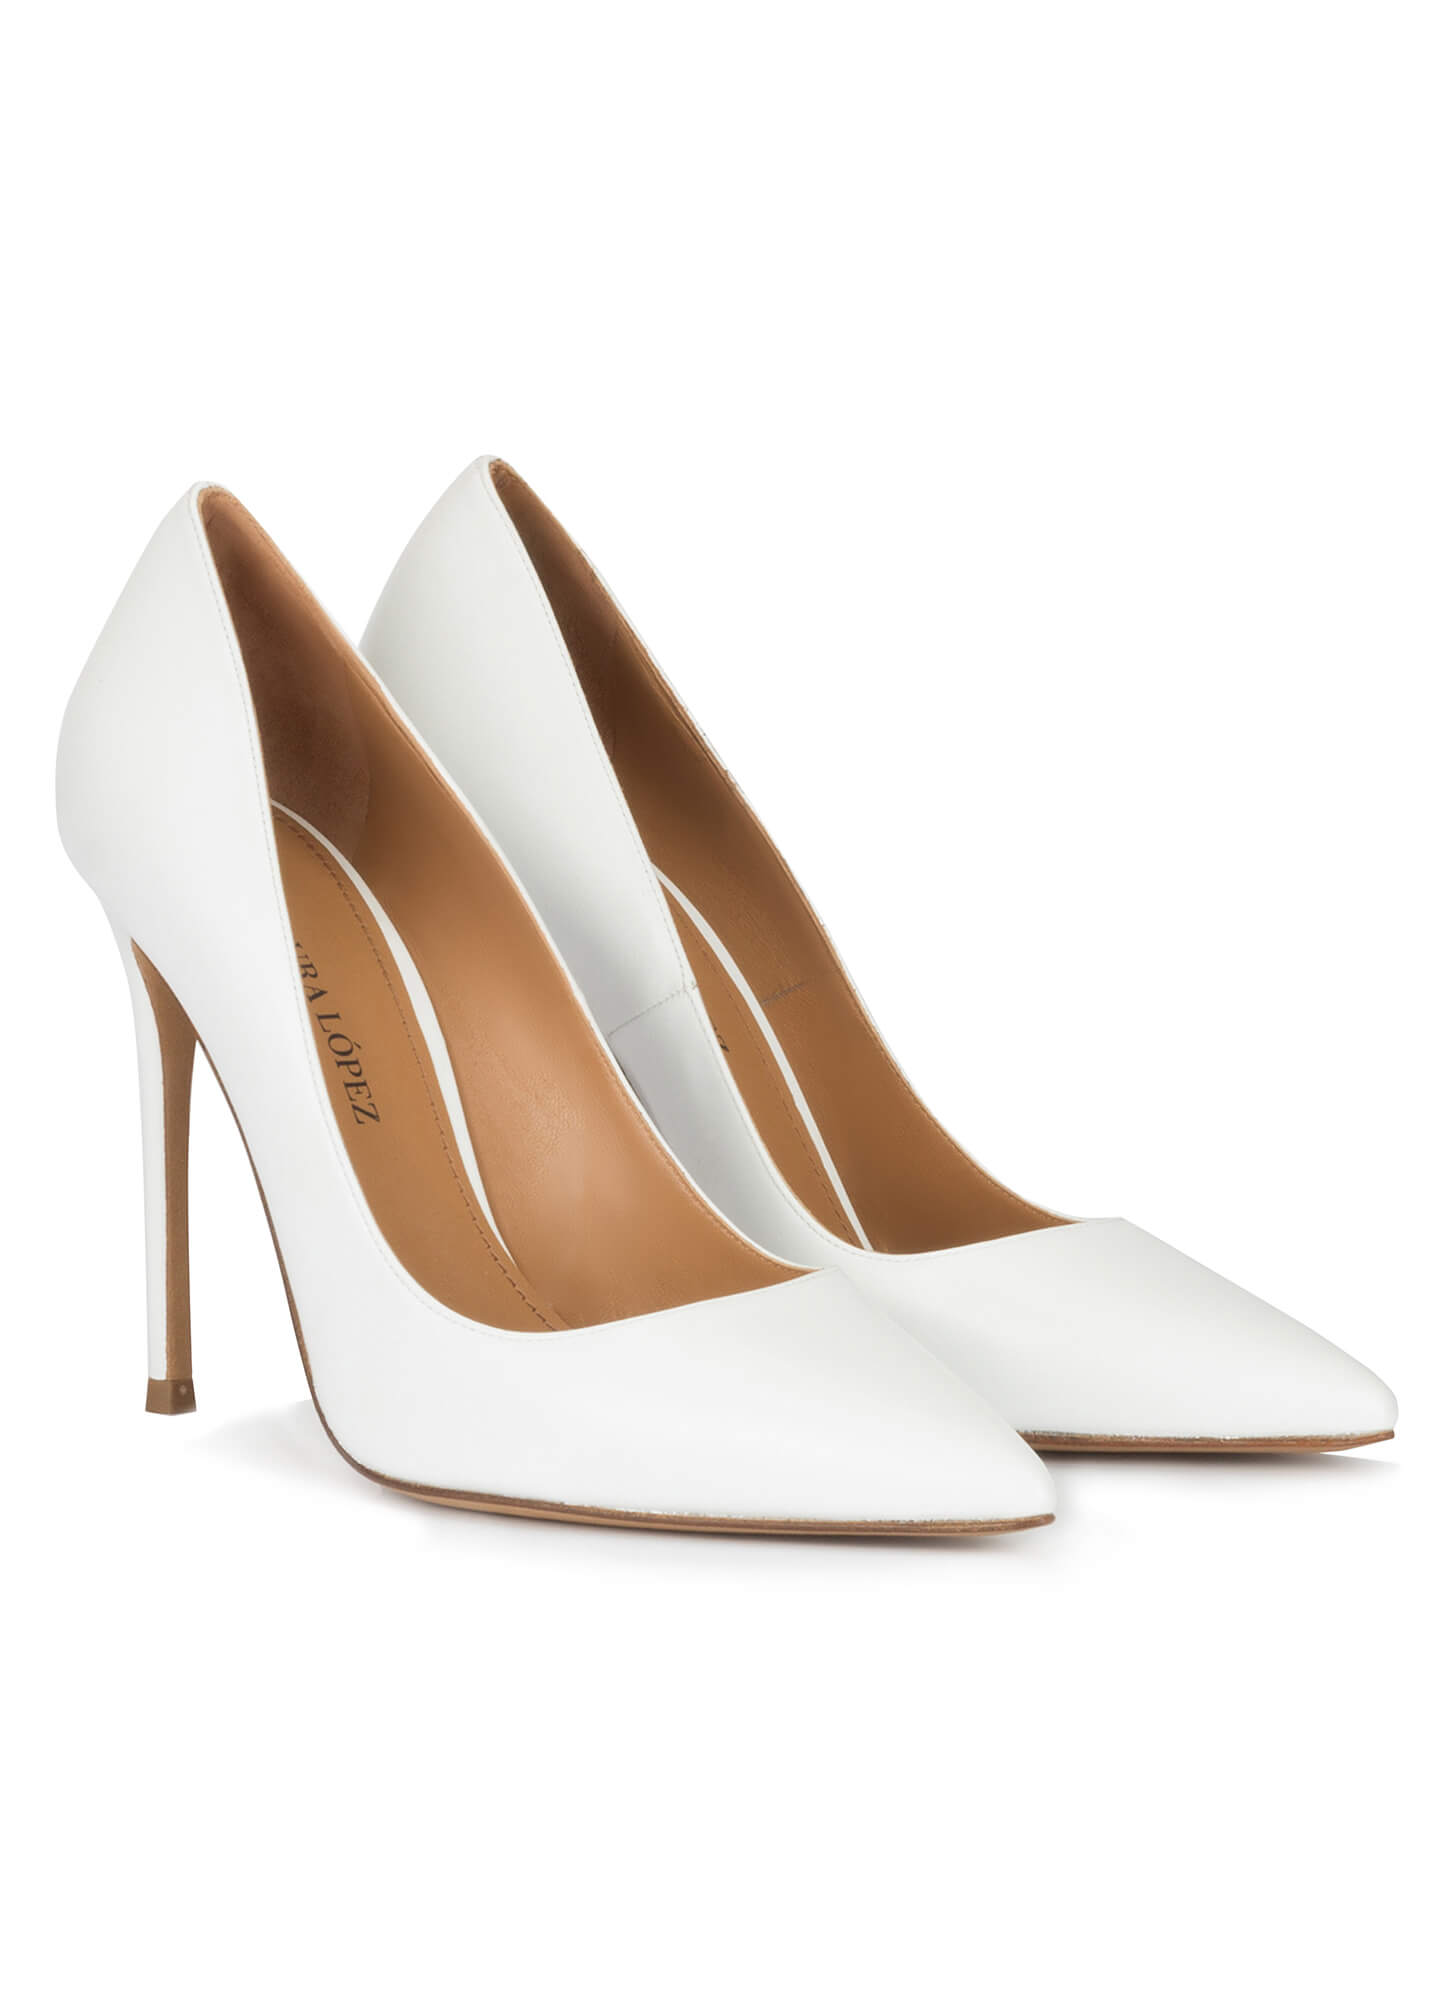 White leather high heel pointy toe pumps . PURA LOPEZ